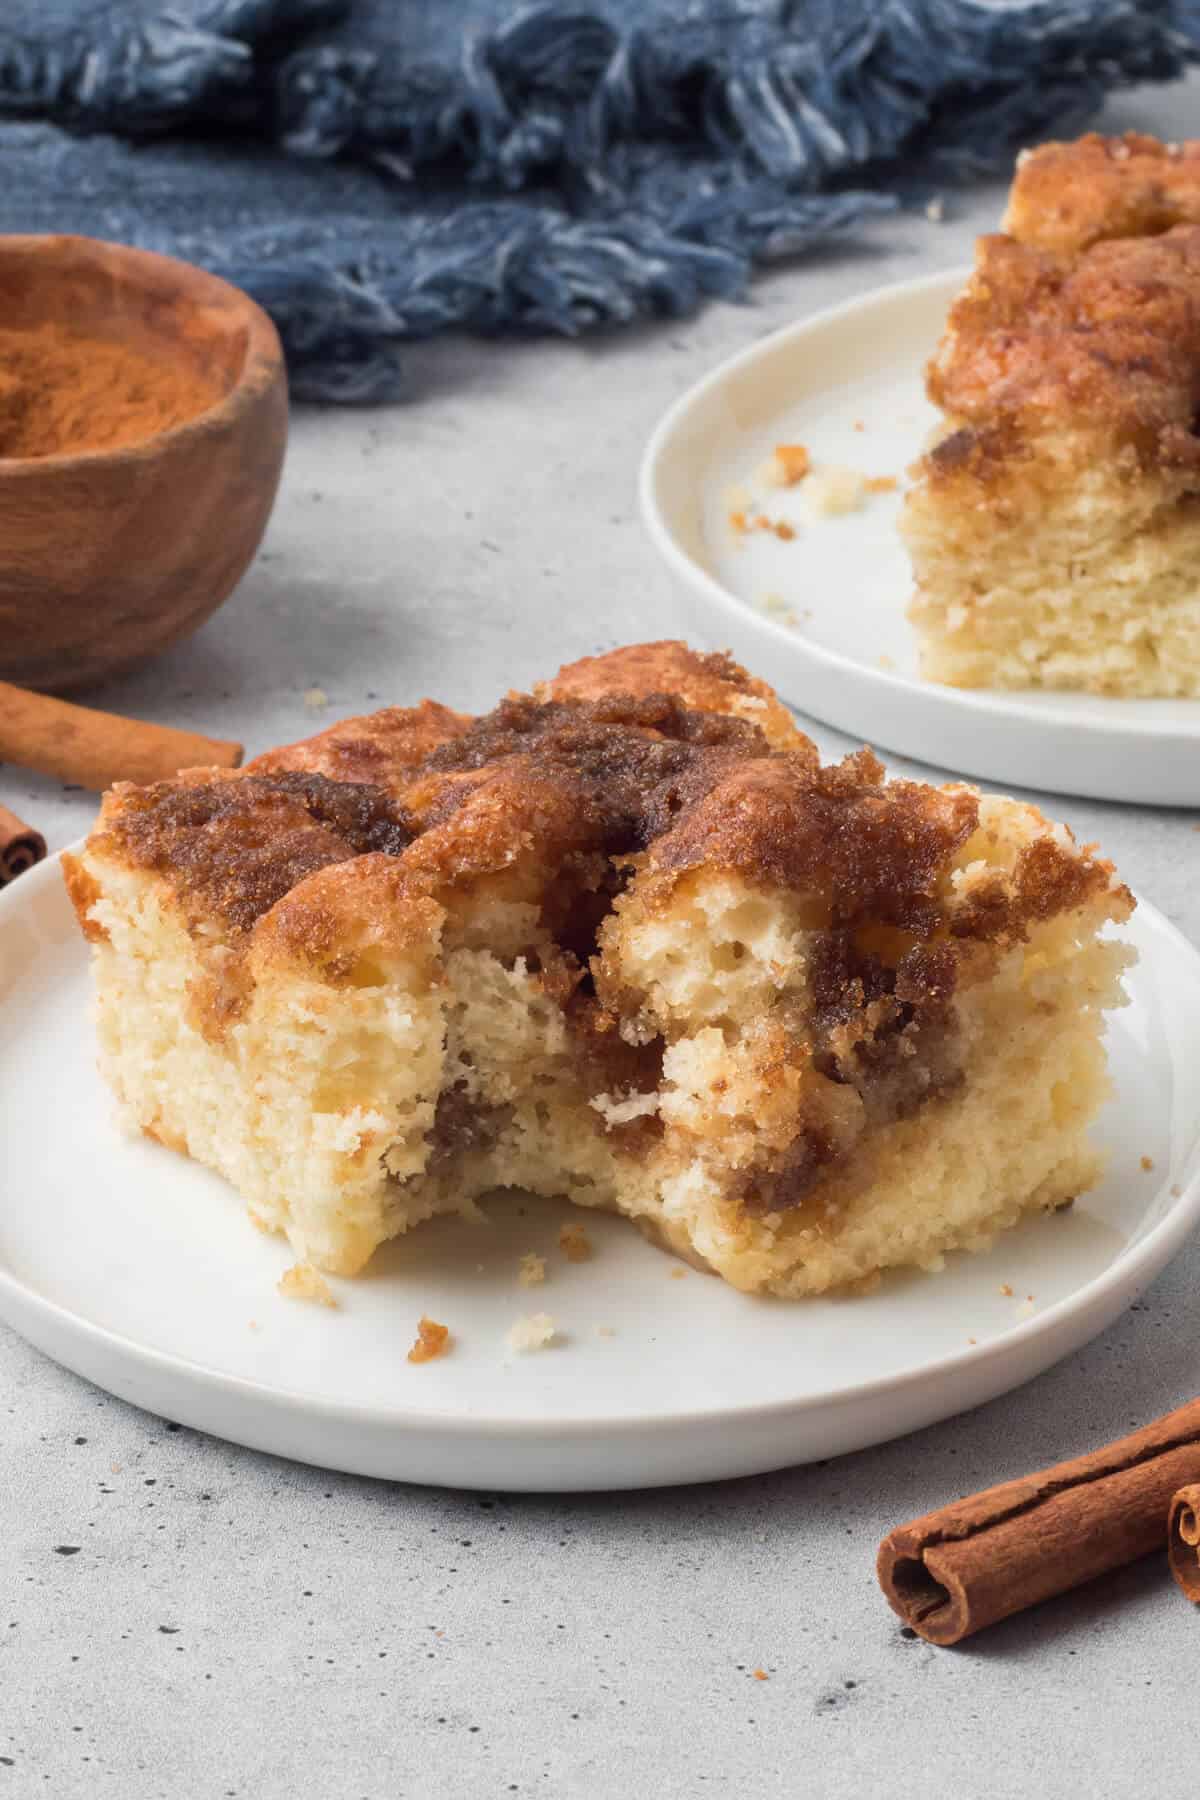 Cinnamon coffee cake on a plate with a bite out of it.